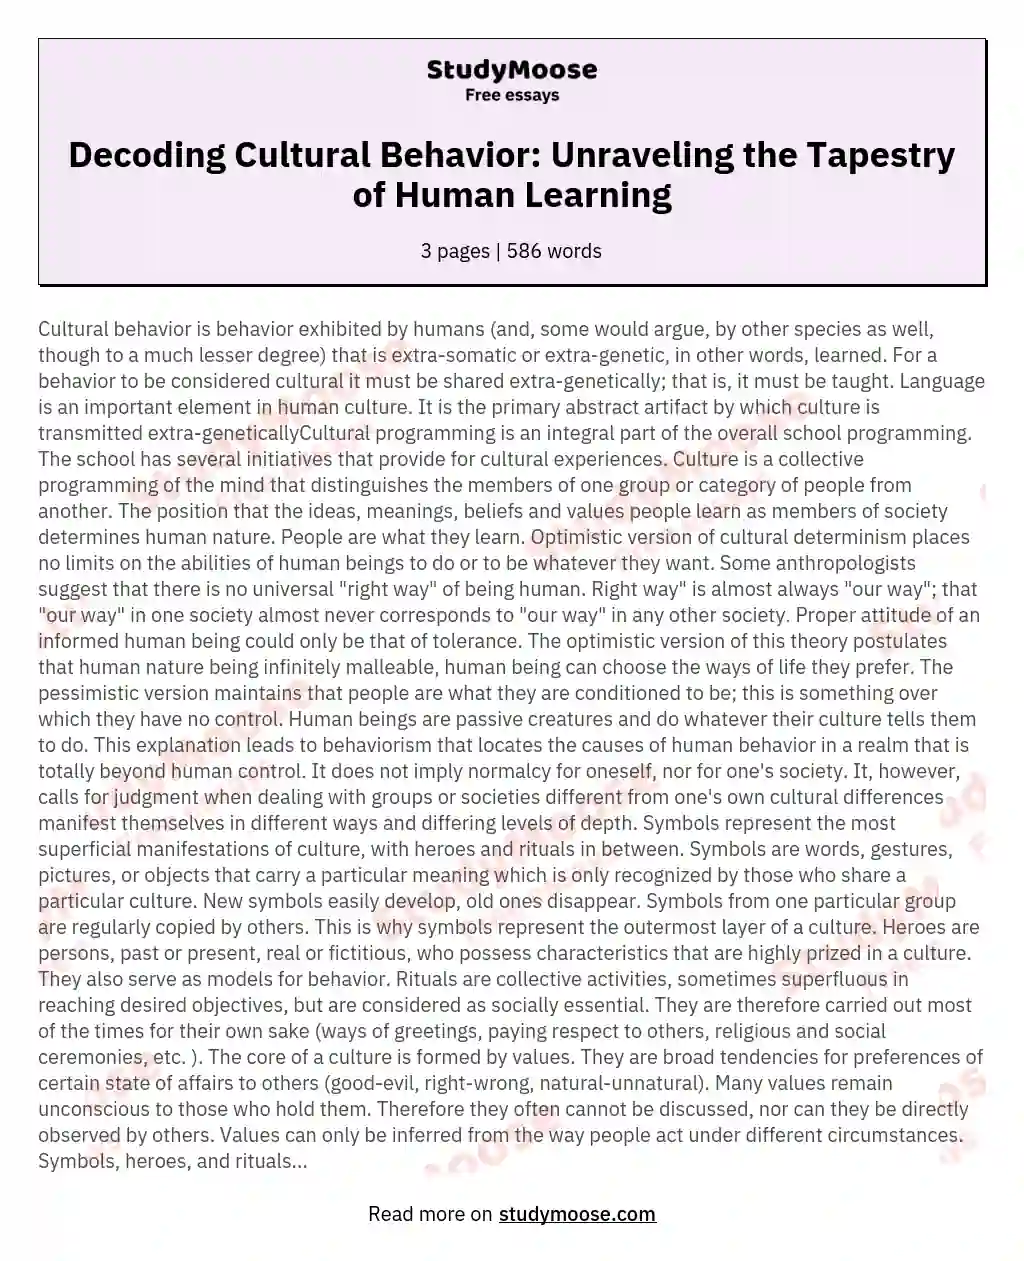 Decoding Cultural Behavior: Unraveling the Tapestry of Human Learning essay